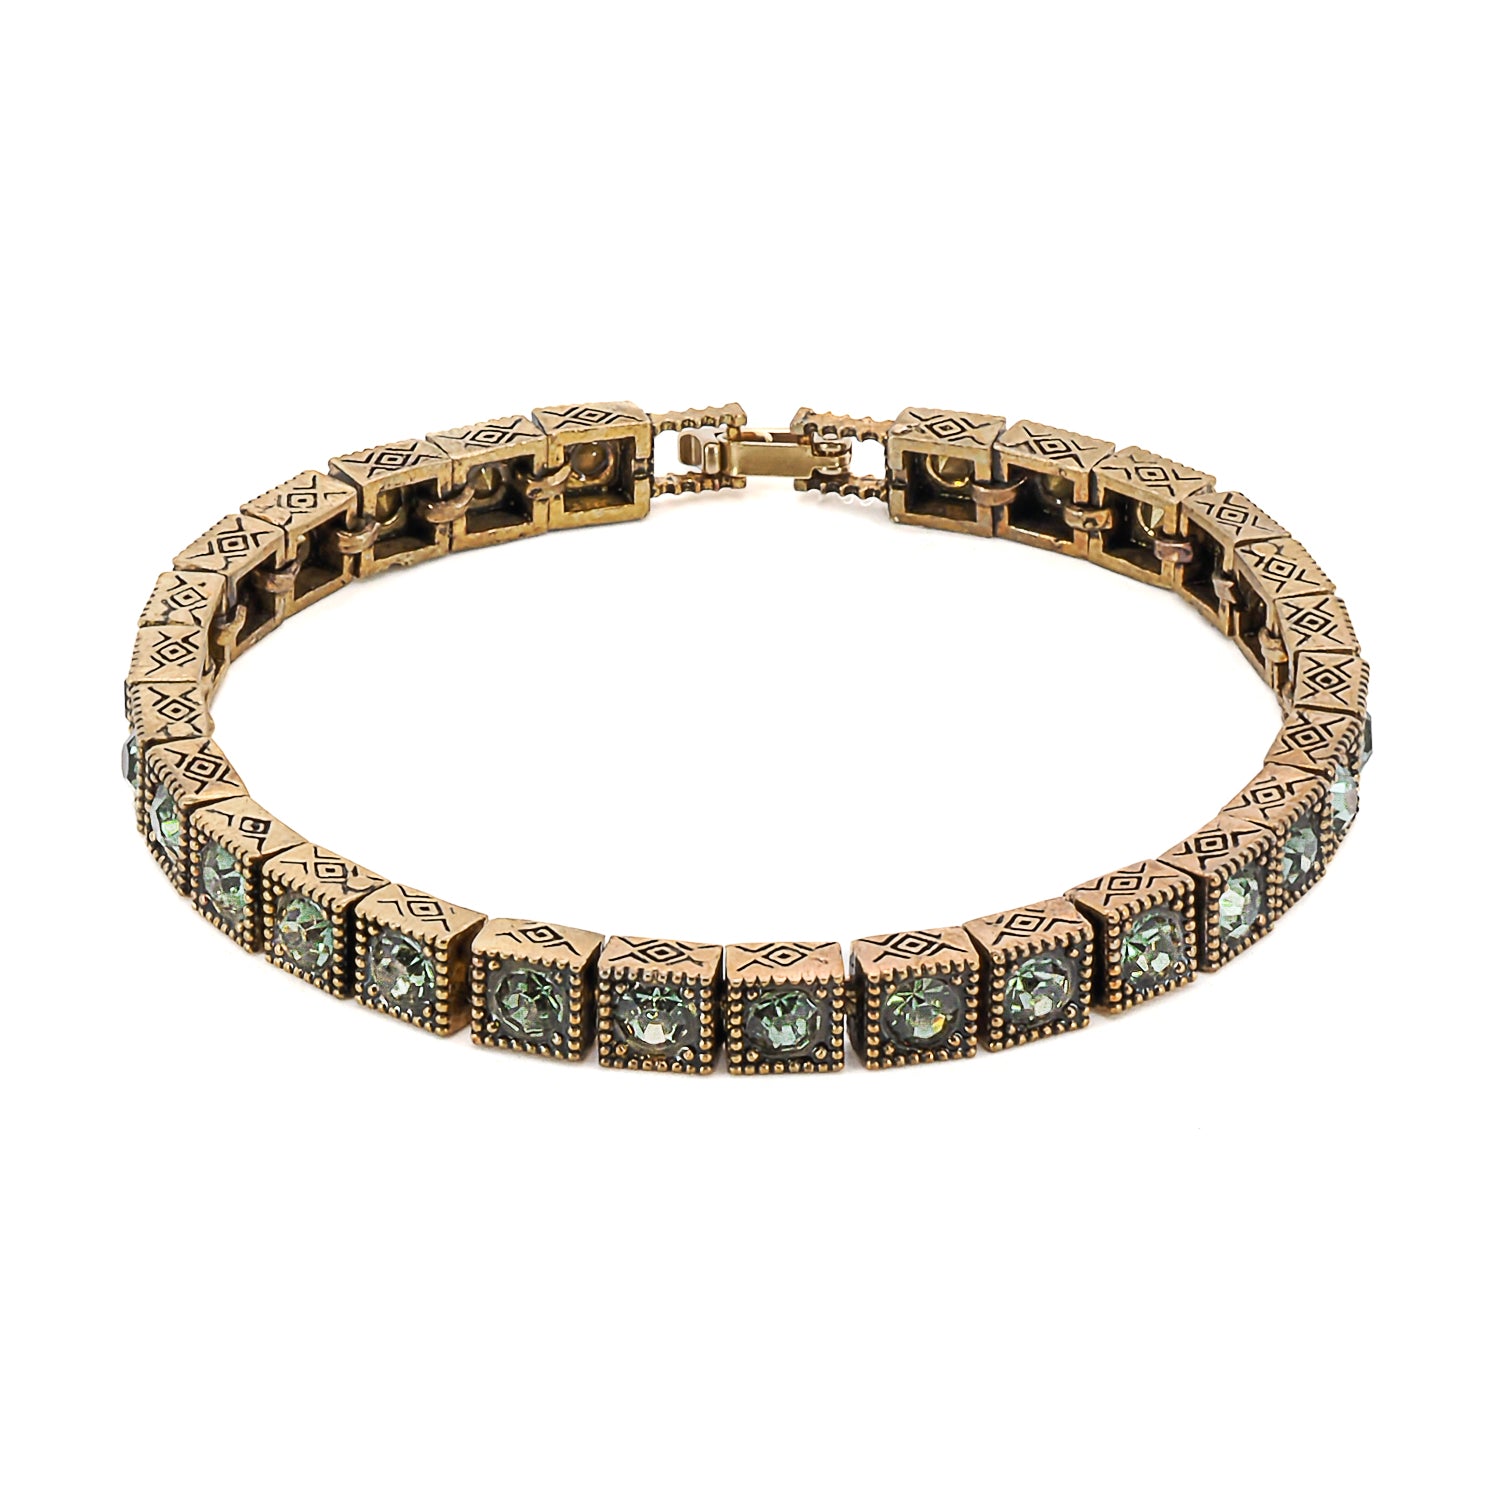 The Green Swarovski Crystal Tennis Bracelet, a handcrafted piece of elegance and sophistication.